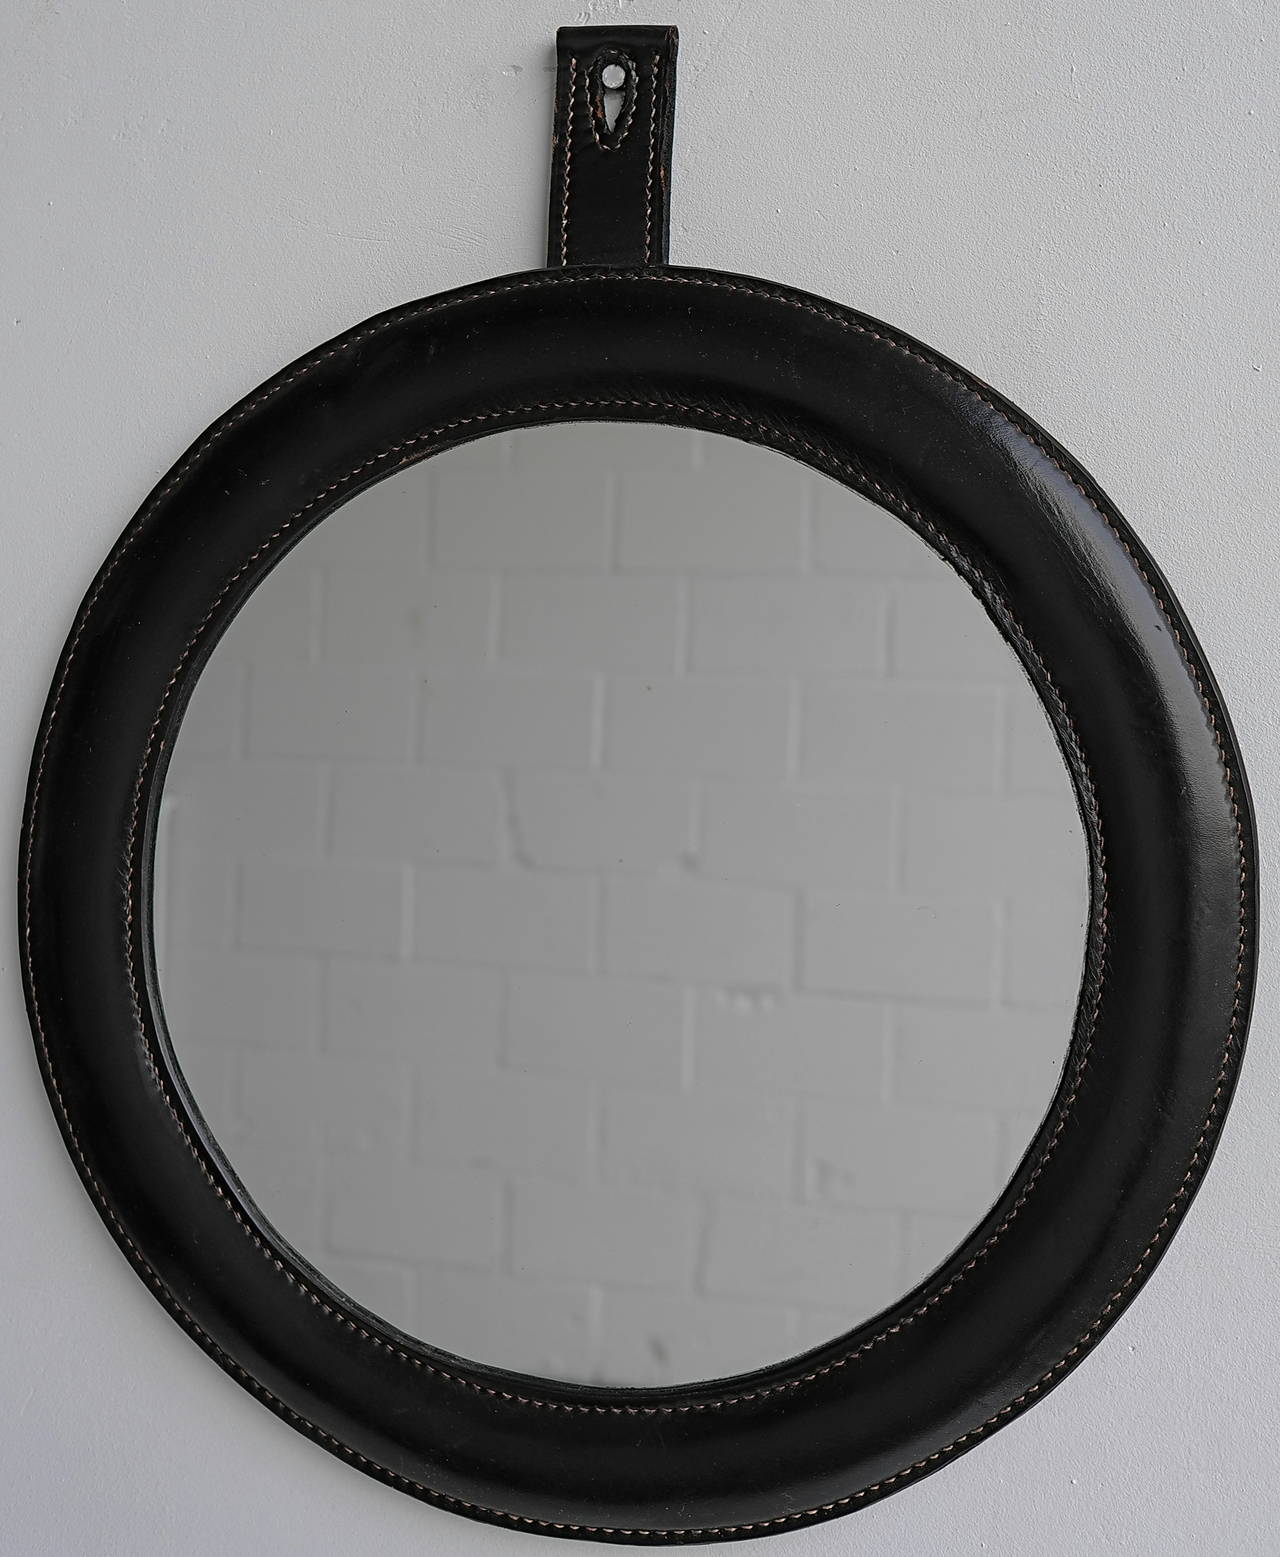 Hand stiched black leather wall mirror in style of Jacques Adnet